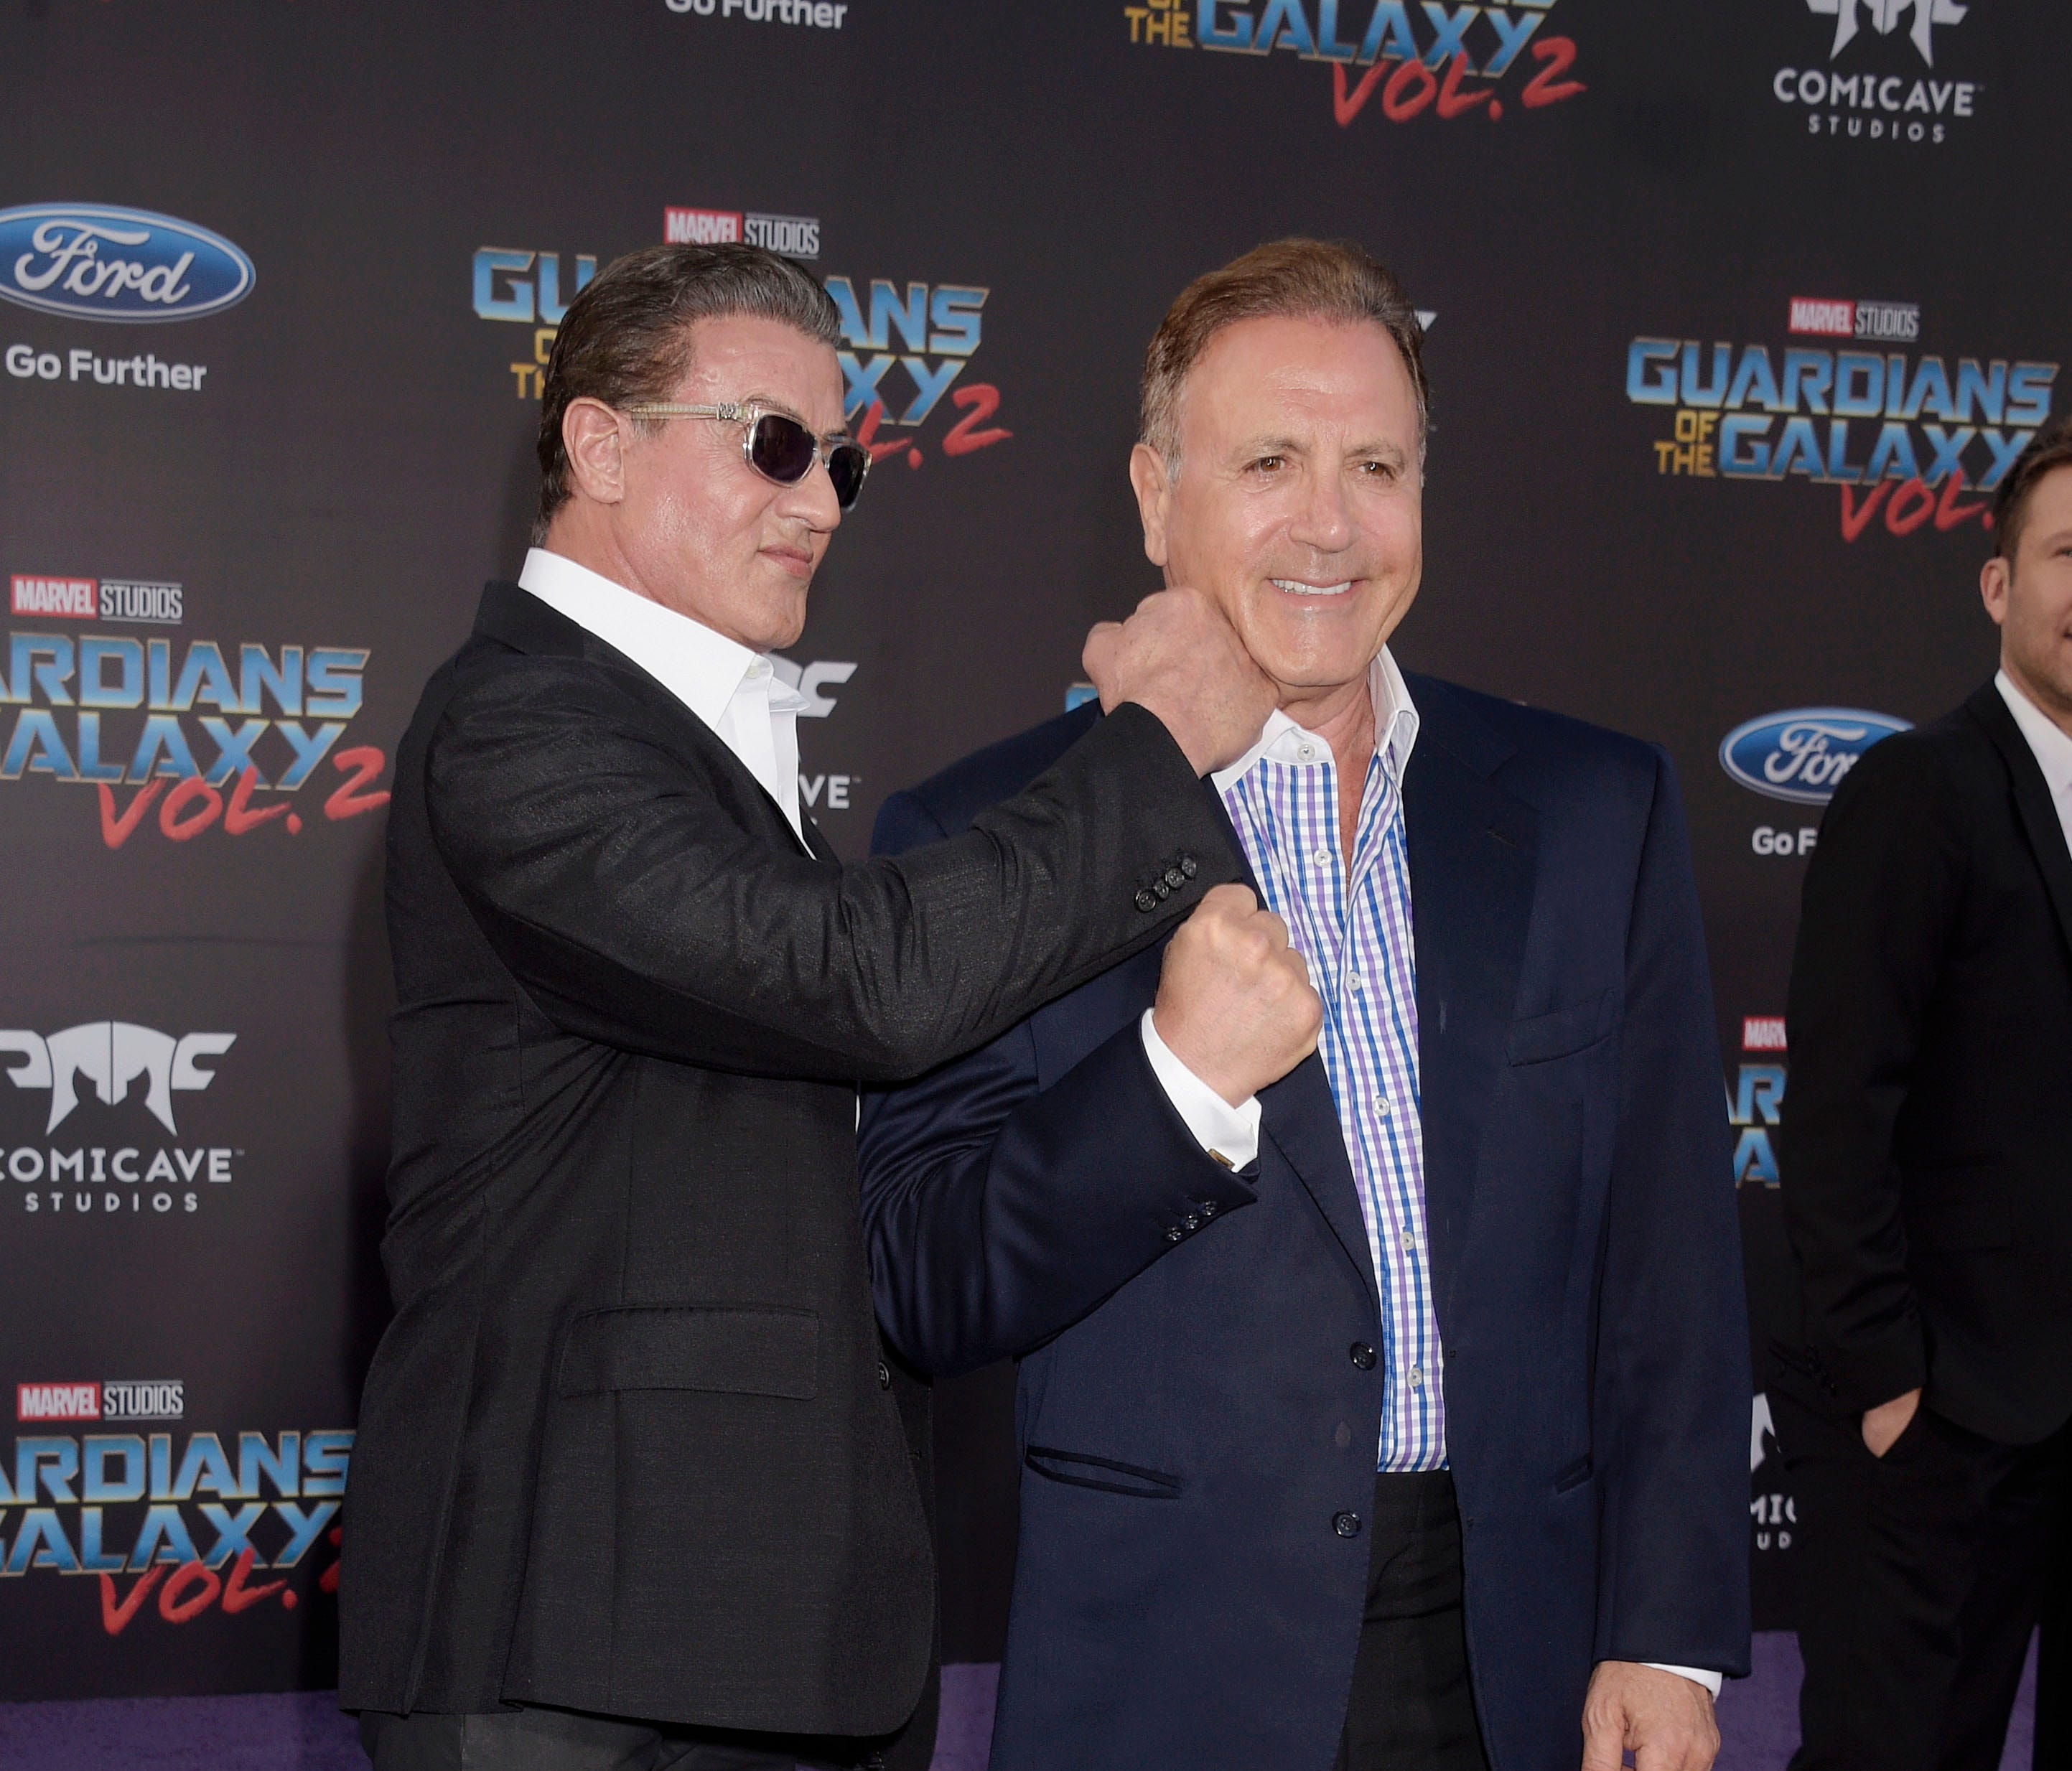 Frank Stallone, right, gets playfully punched by his brother Sylvester at the 'Guardians of the Galaxy Vol. 2' premiere in April 2017.